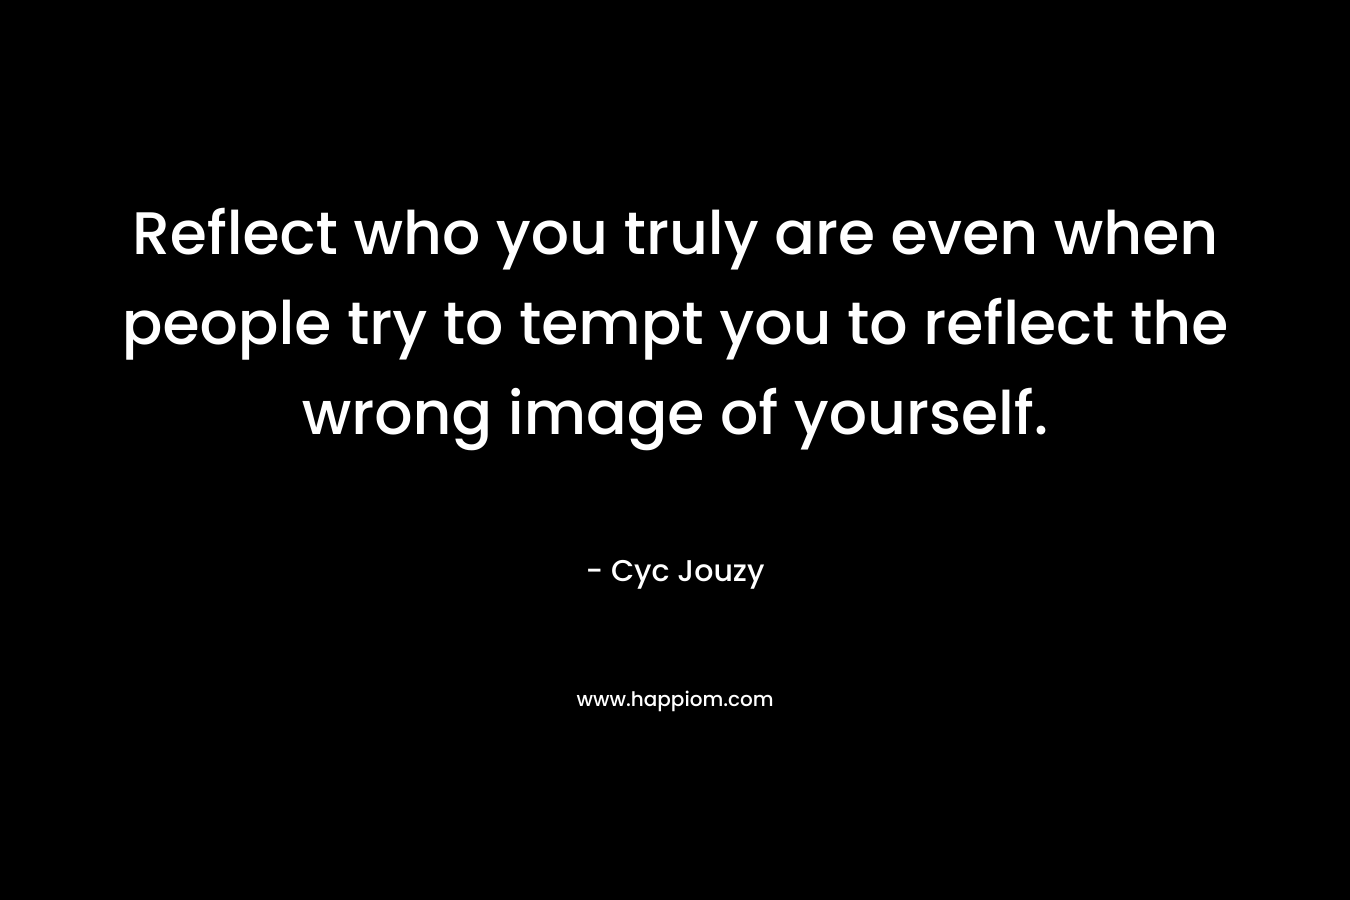 Reflect who you truly are even when people try to tempt you to reflect the wrong image of yourself.